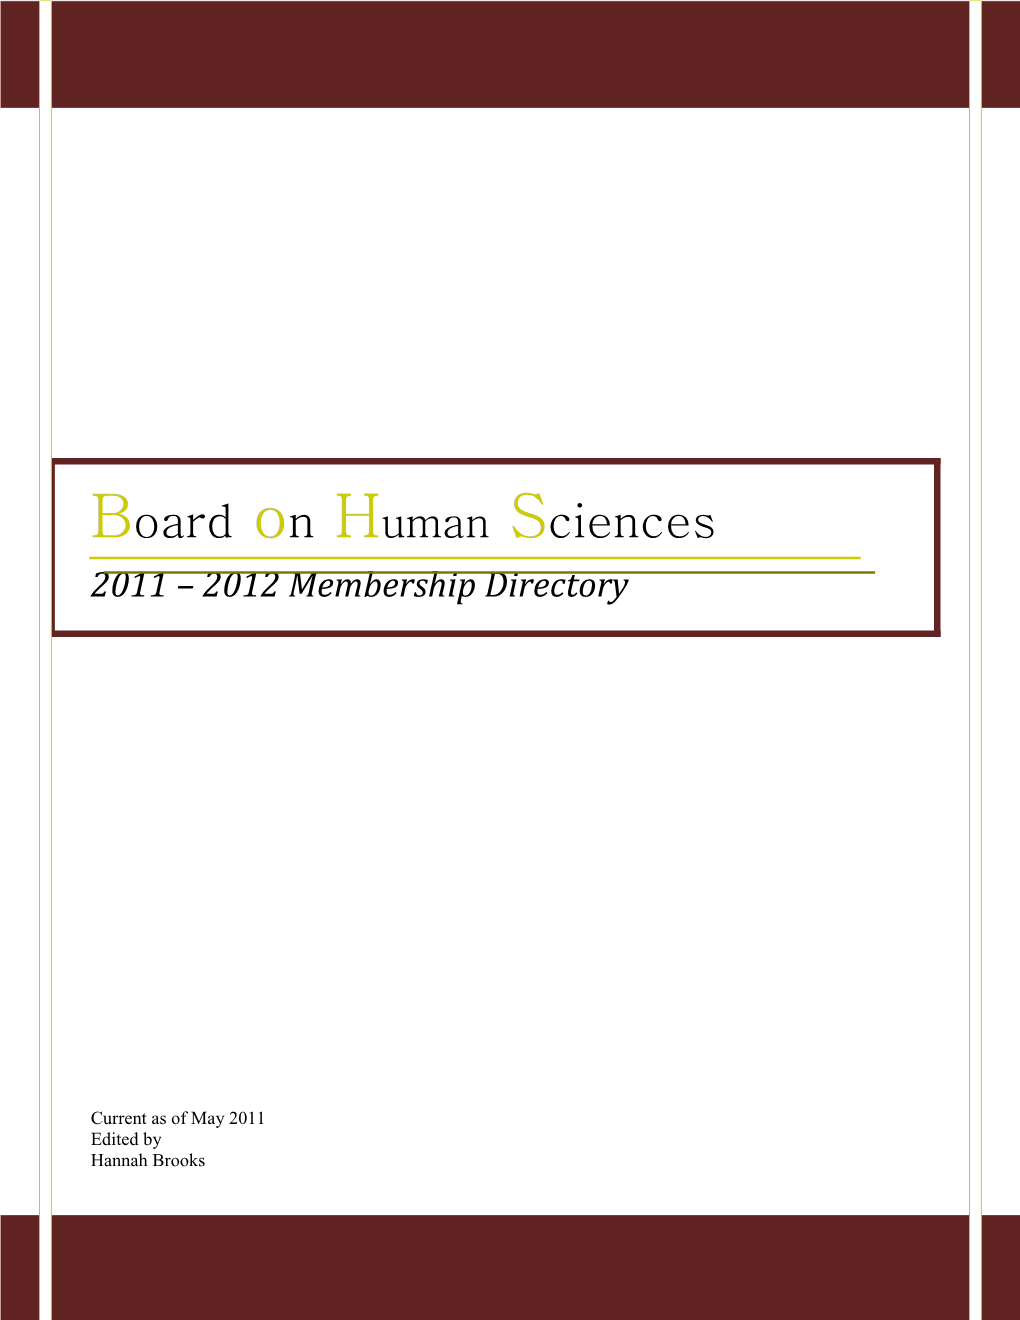 Board on Human Sciences s1